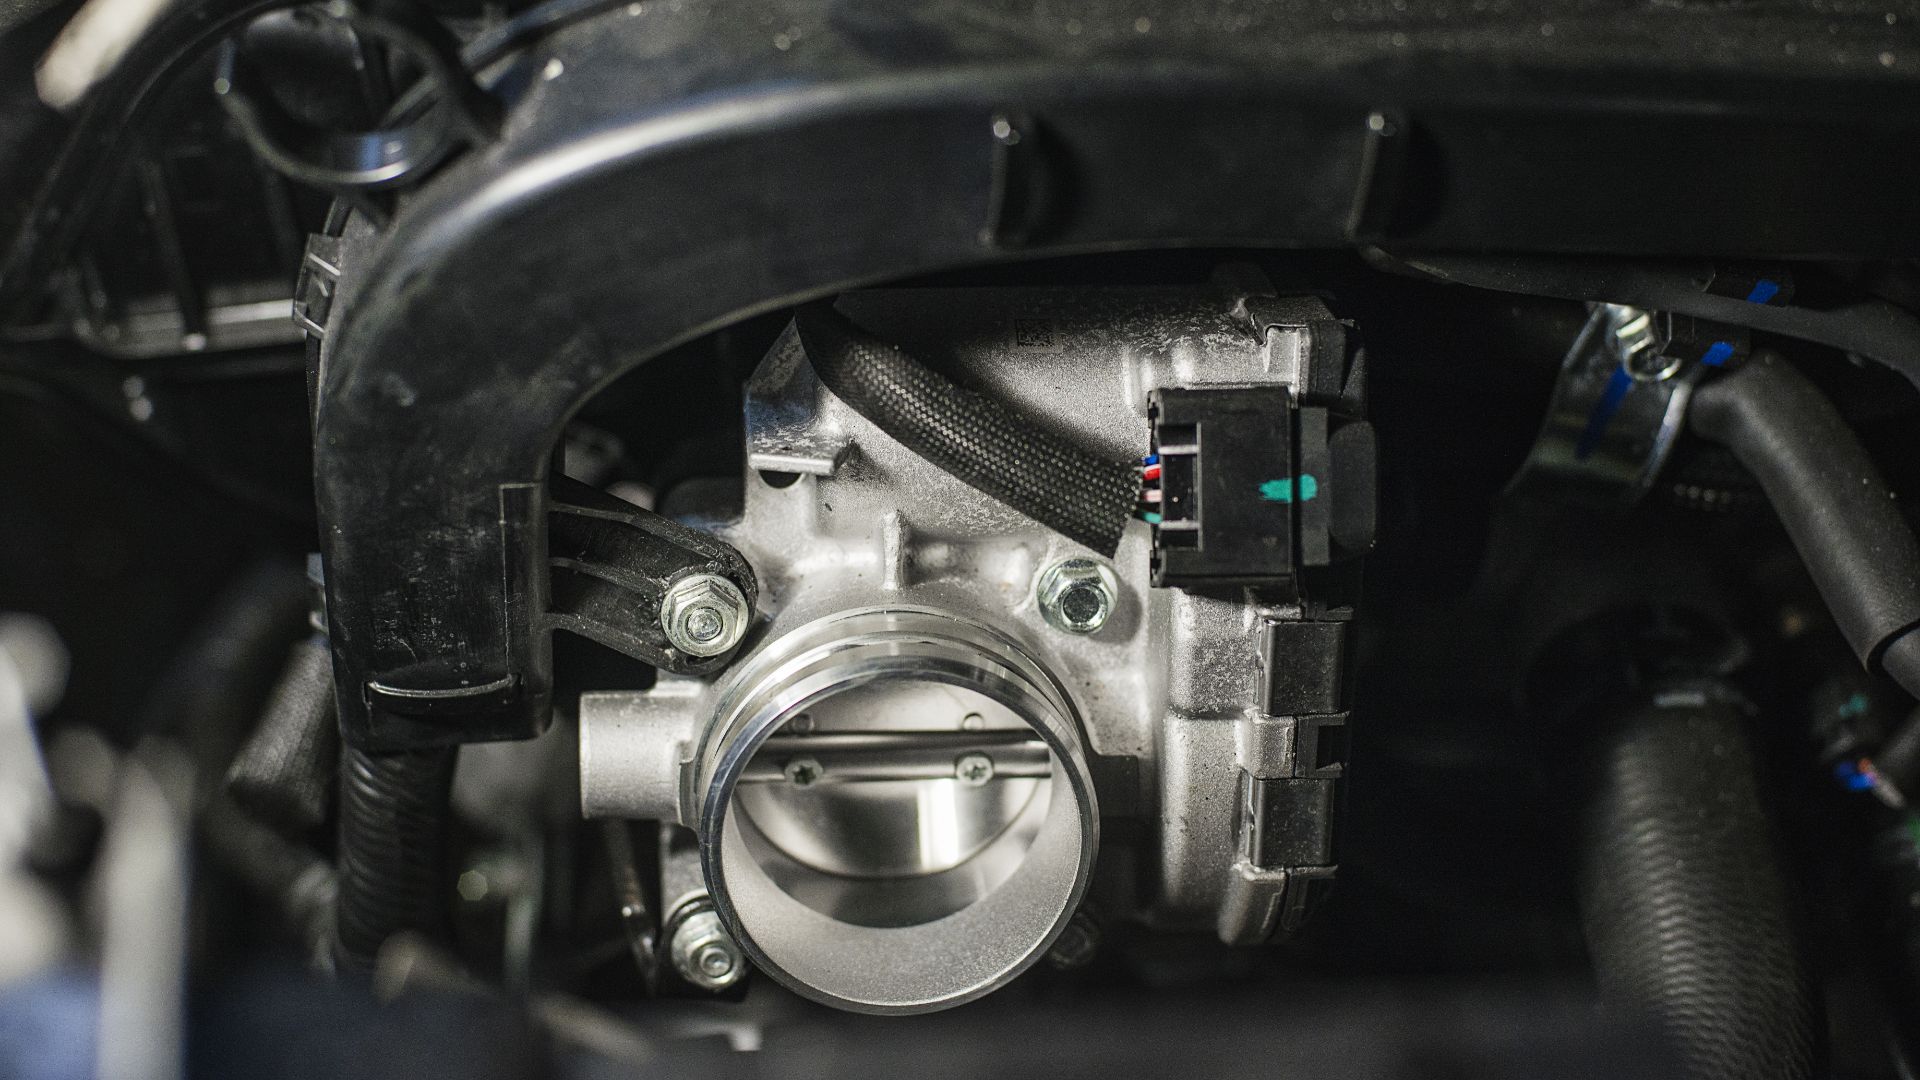 a close up view of the engine of a car.